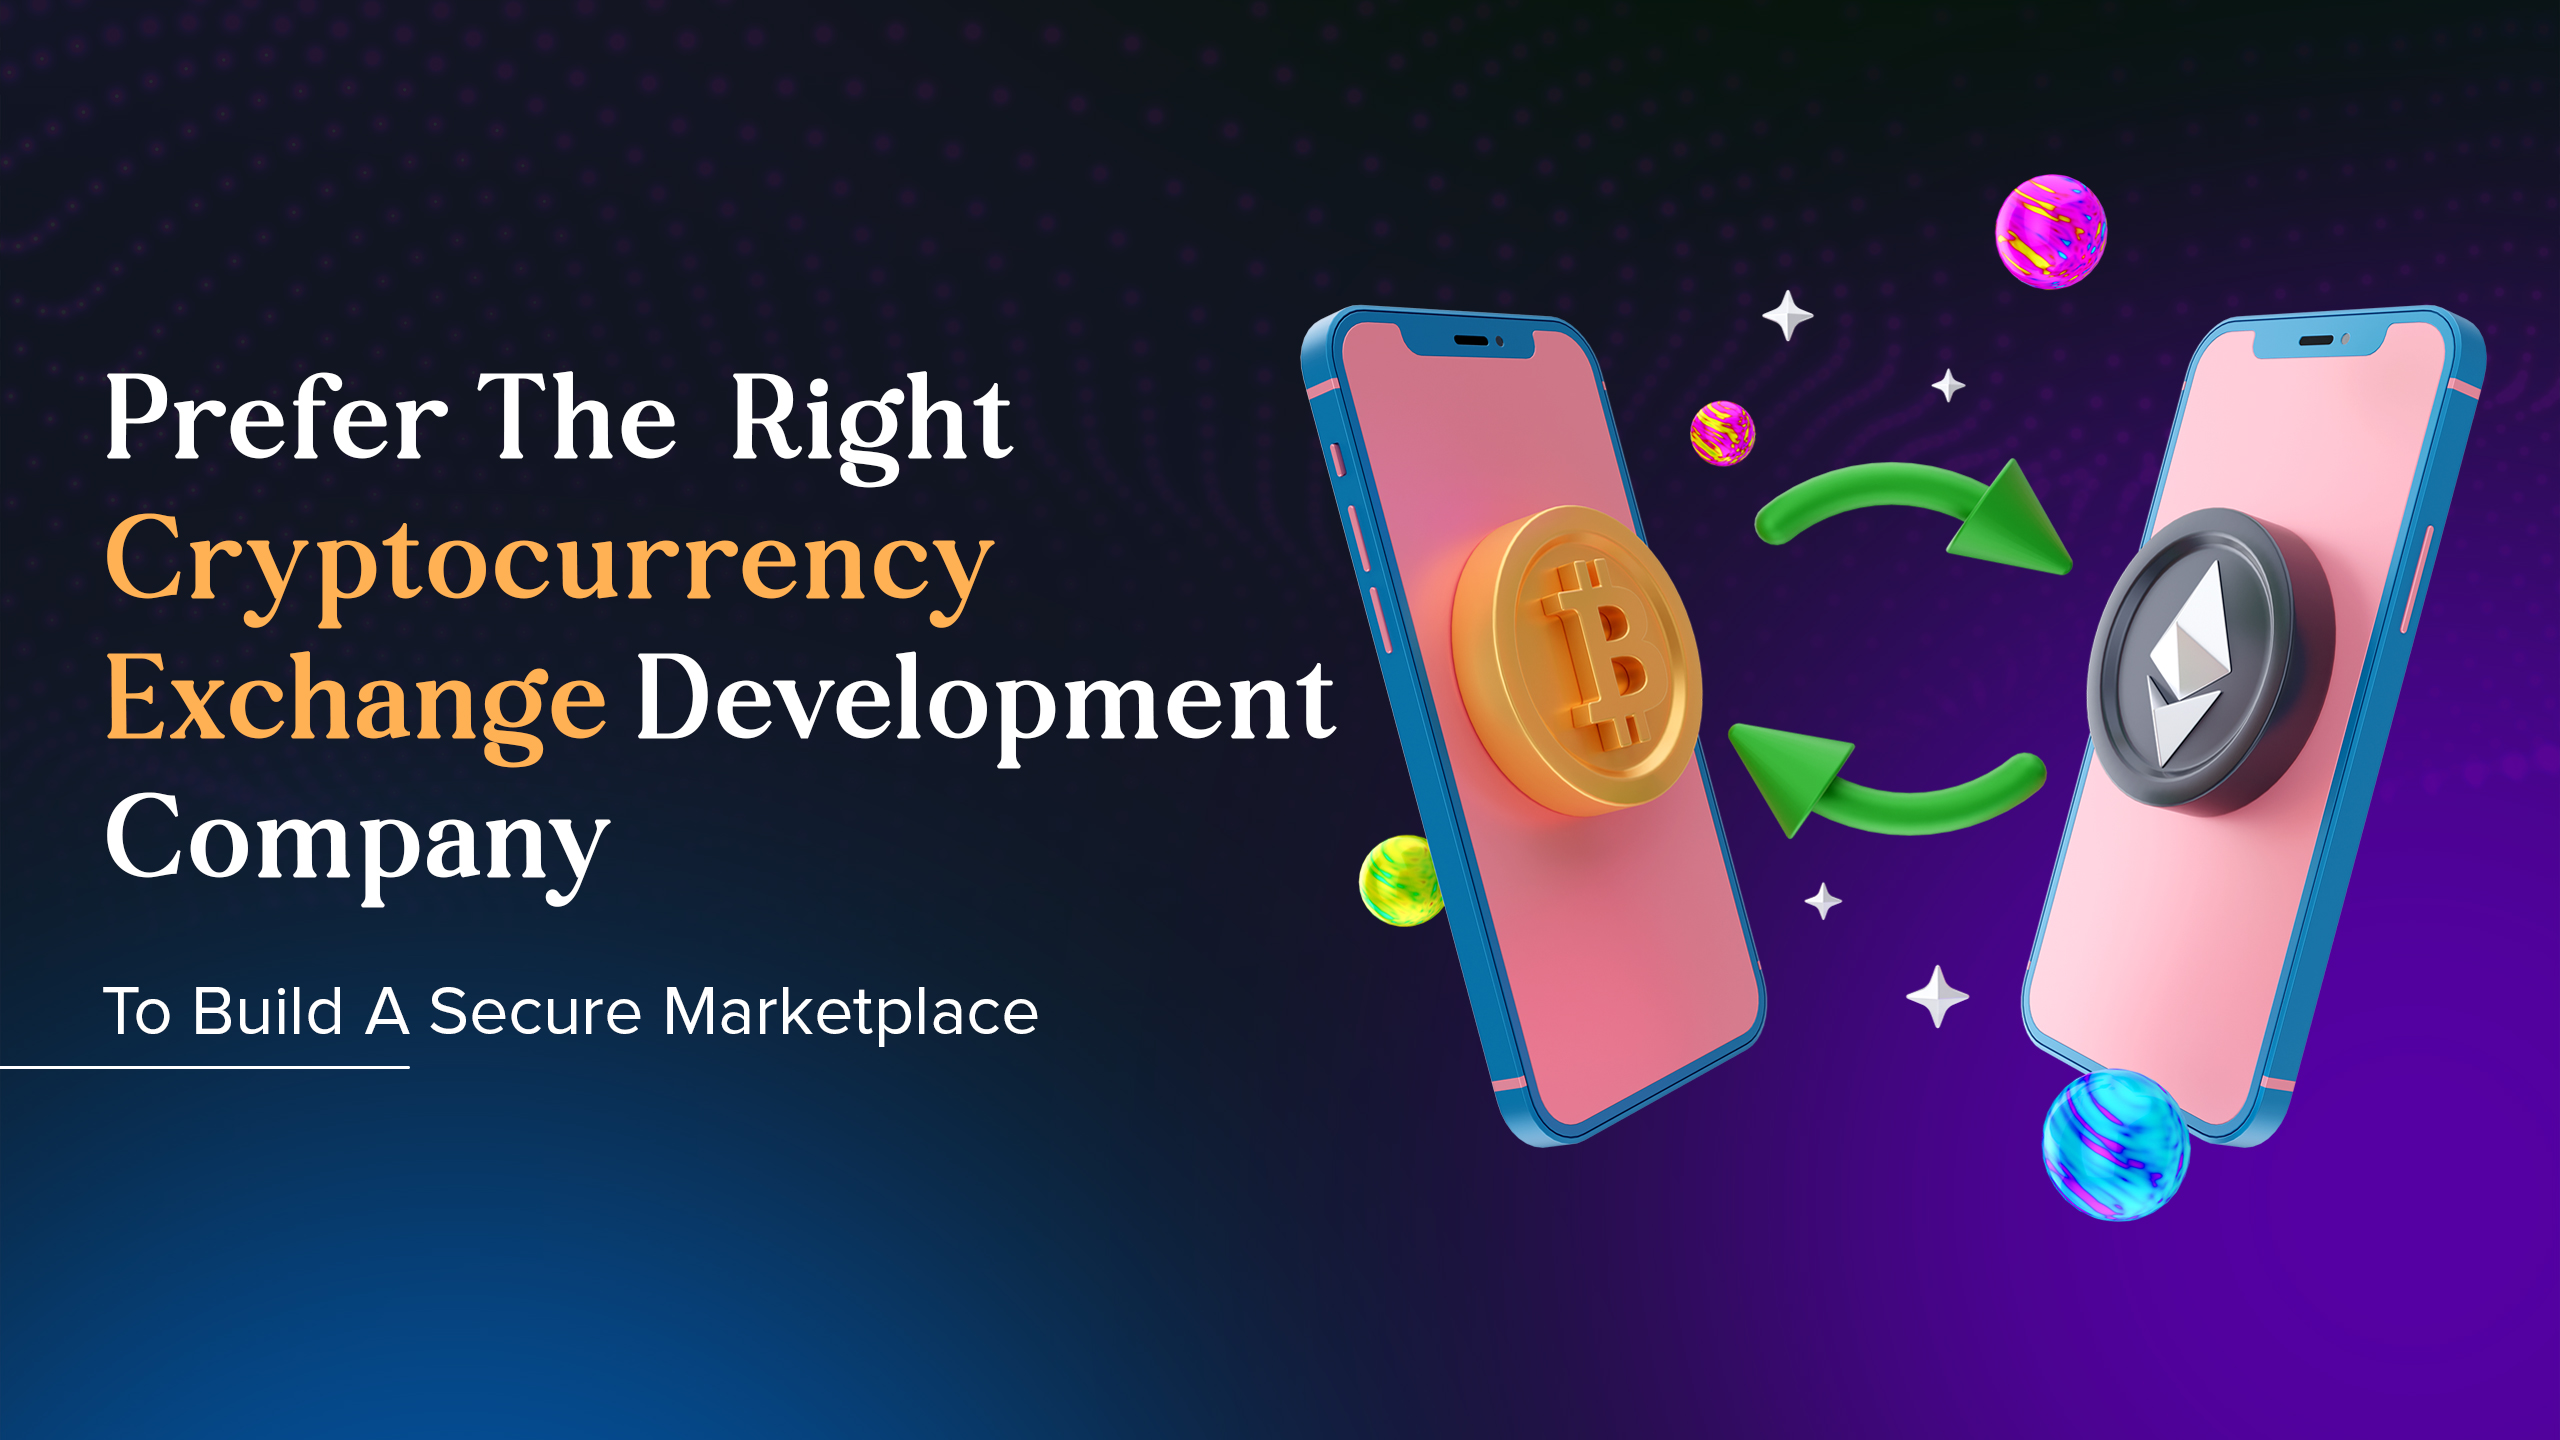 Build Secure Marketplace - Cryptocurrency Exchange Development Company